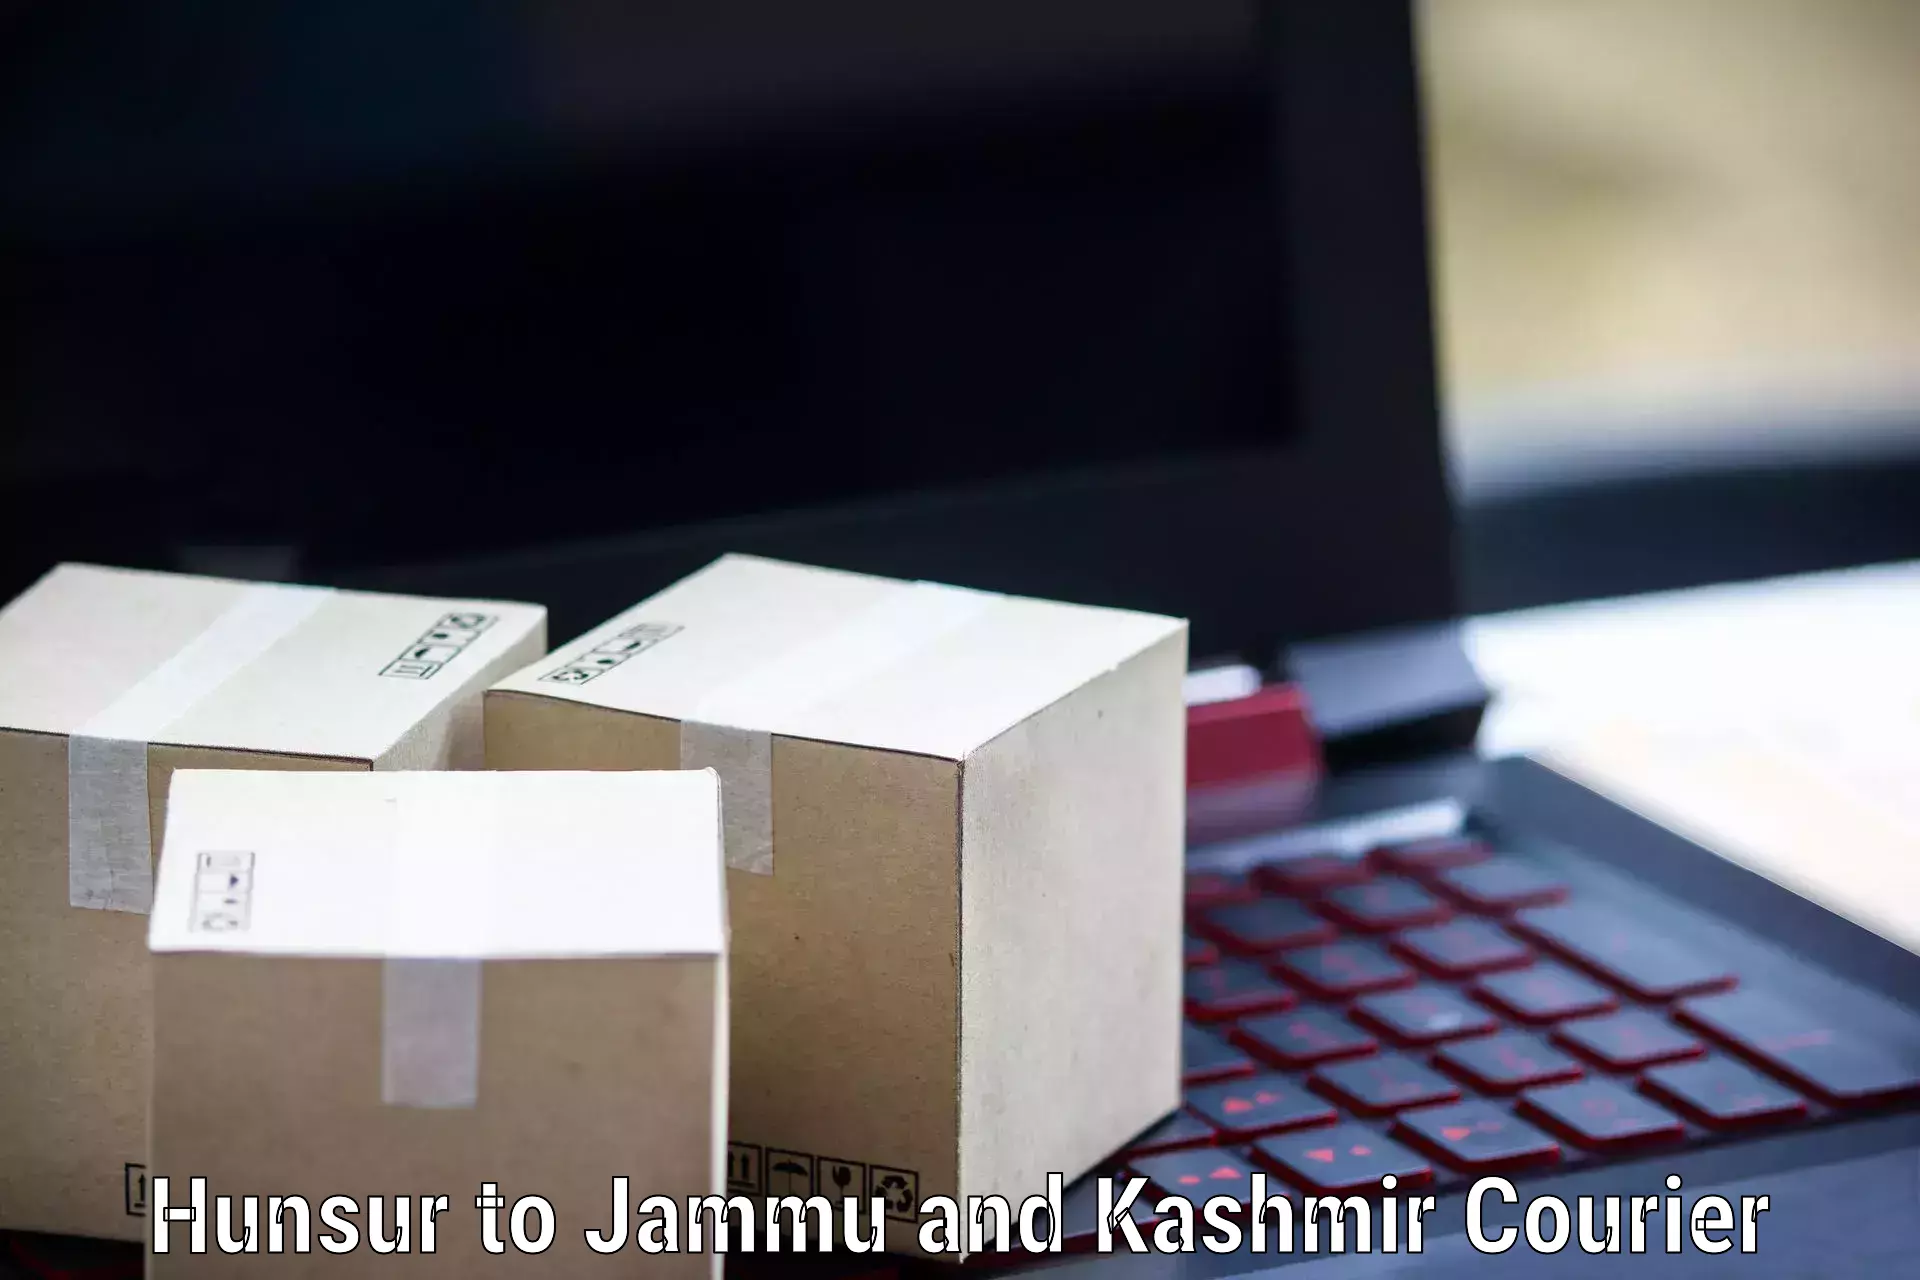 Global courier networks Hunsur to Rajouri